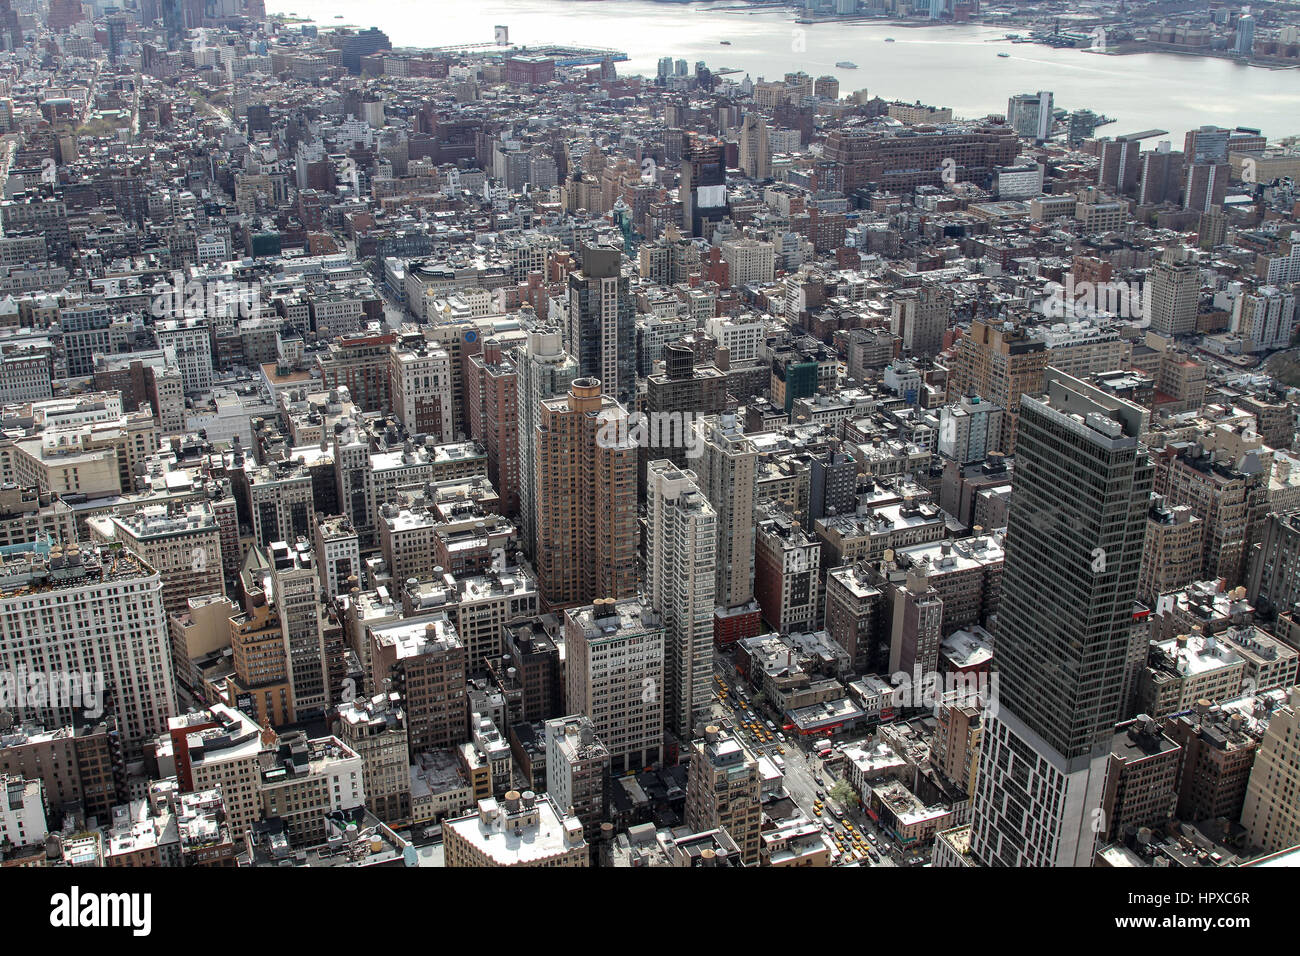 New York City viewed from the Empire State Building Stock Photo